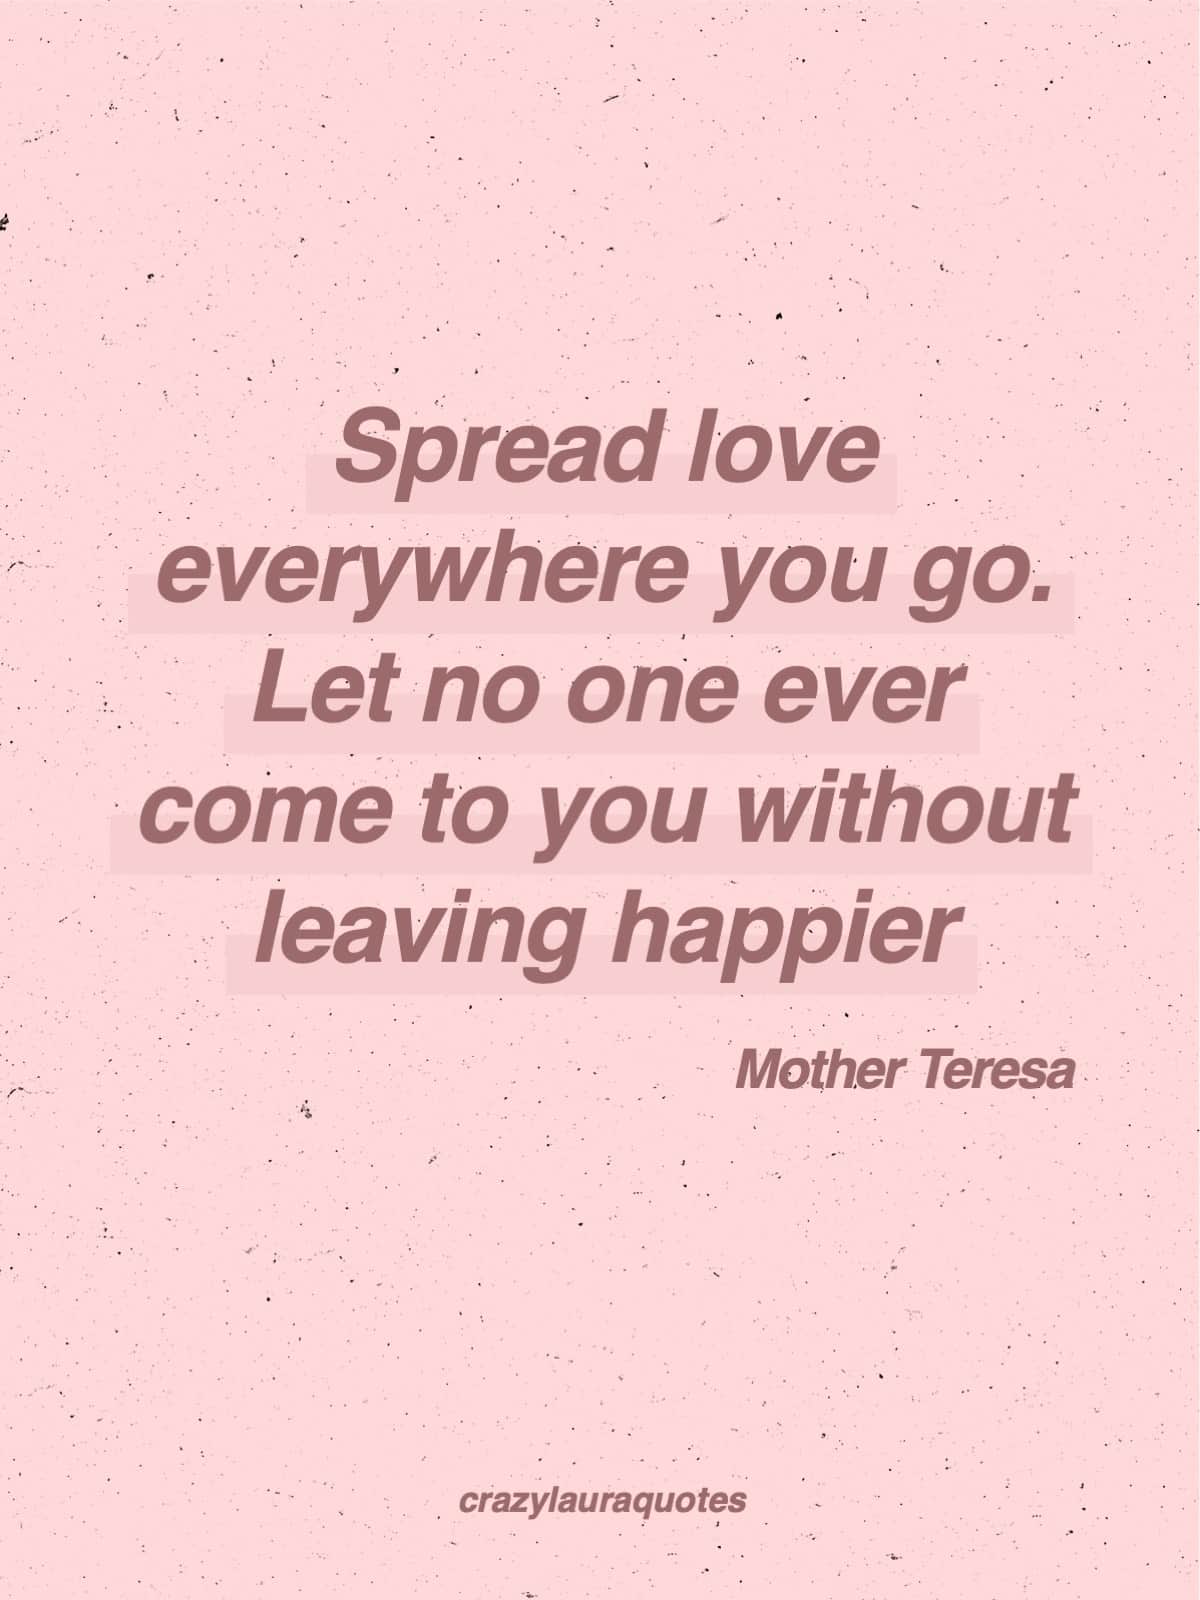 go with happiness and love inspo